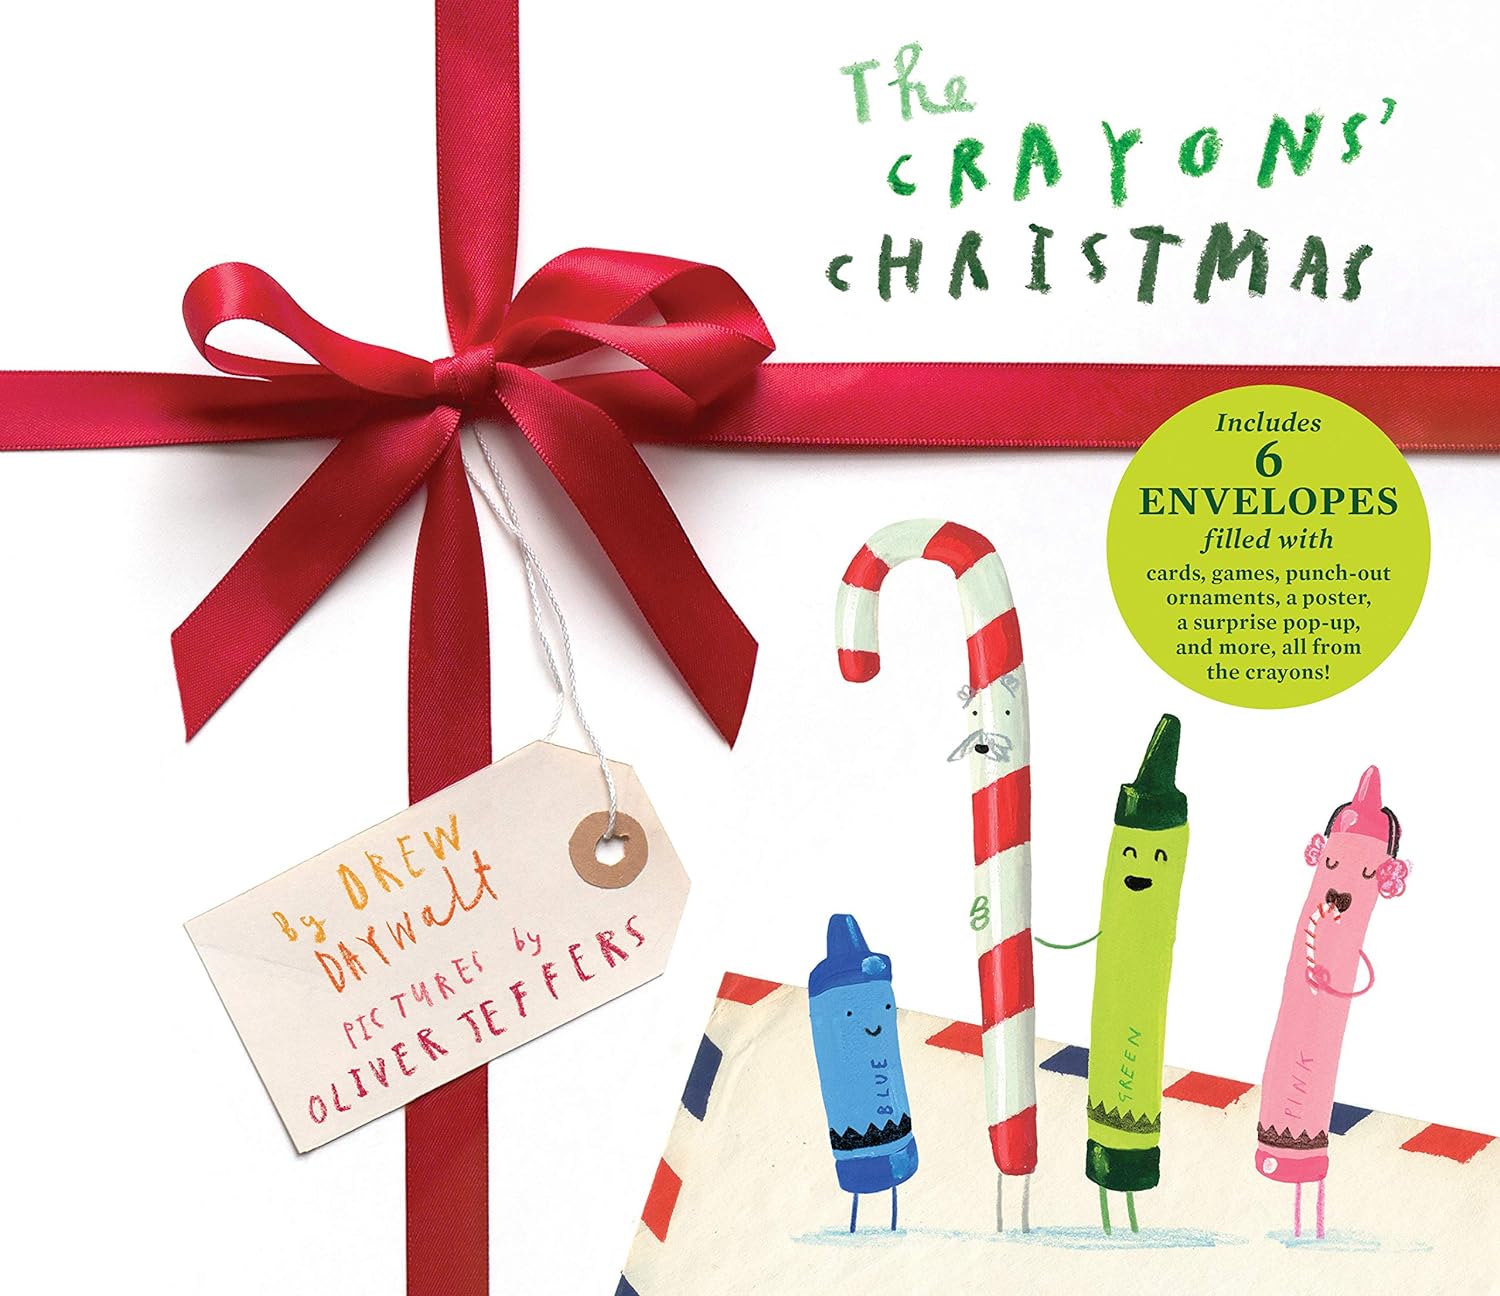 The Crayons' Christmas Hardcover by Drew Daywalt